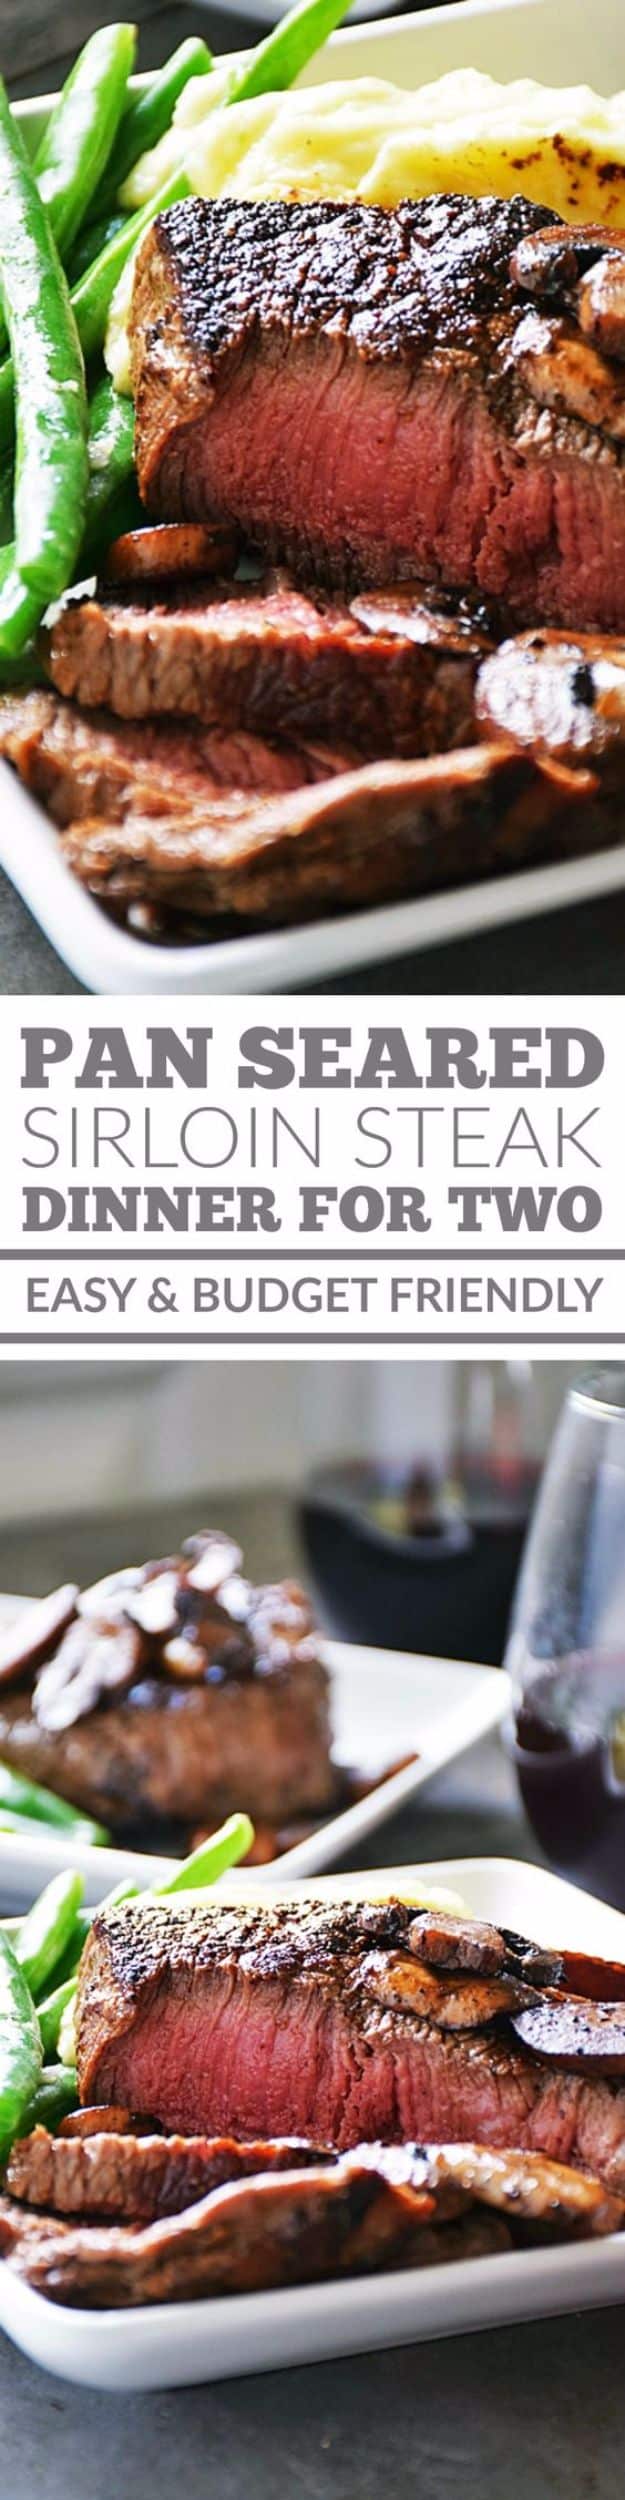 Easy Dinner Ideas for Two - Pan Seared Sirloin Steak Dinner for Two - Quick, Fast and Simple Recipes to Make for Two People - Freeze and Make Ahead Dinner Recipe Tips for Best Weeknight Dinners - Chicken, Fish, Vegetable, No Bake and Vegetarian Options - Crockpot, Microwave, Healthy, Lowfat 